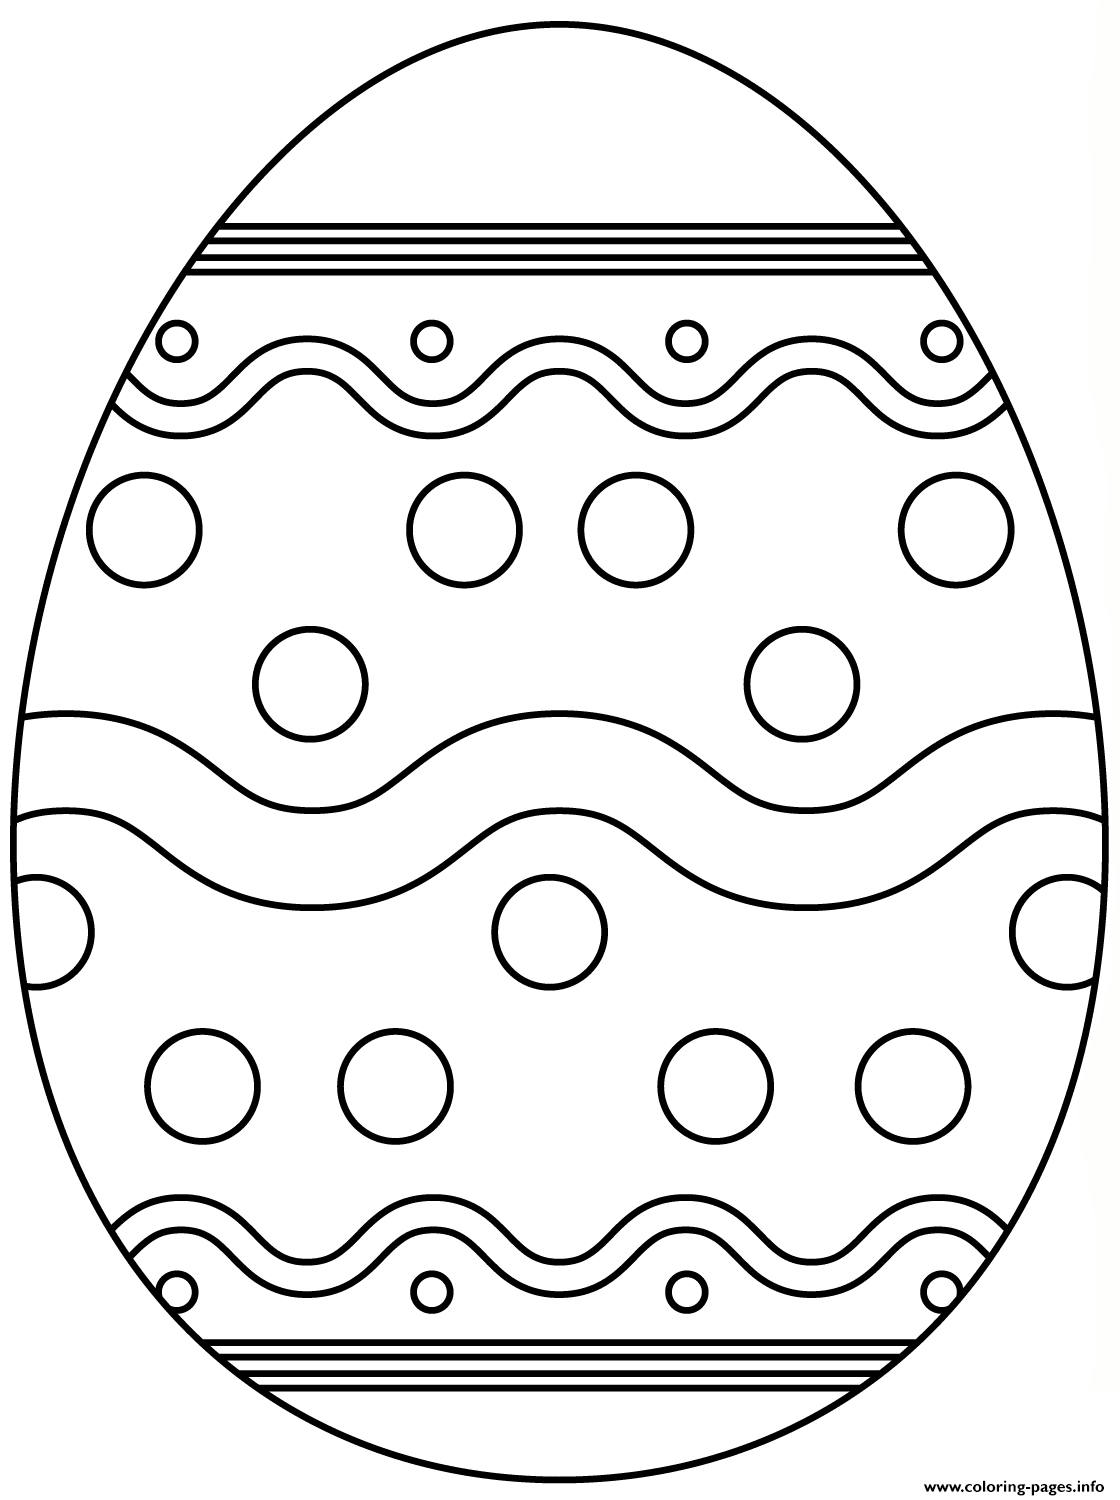 Easter Egg With Abstract Pattern 4 coloring